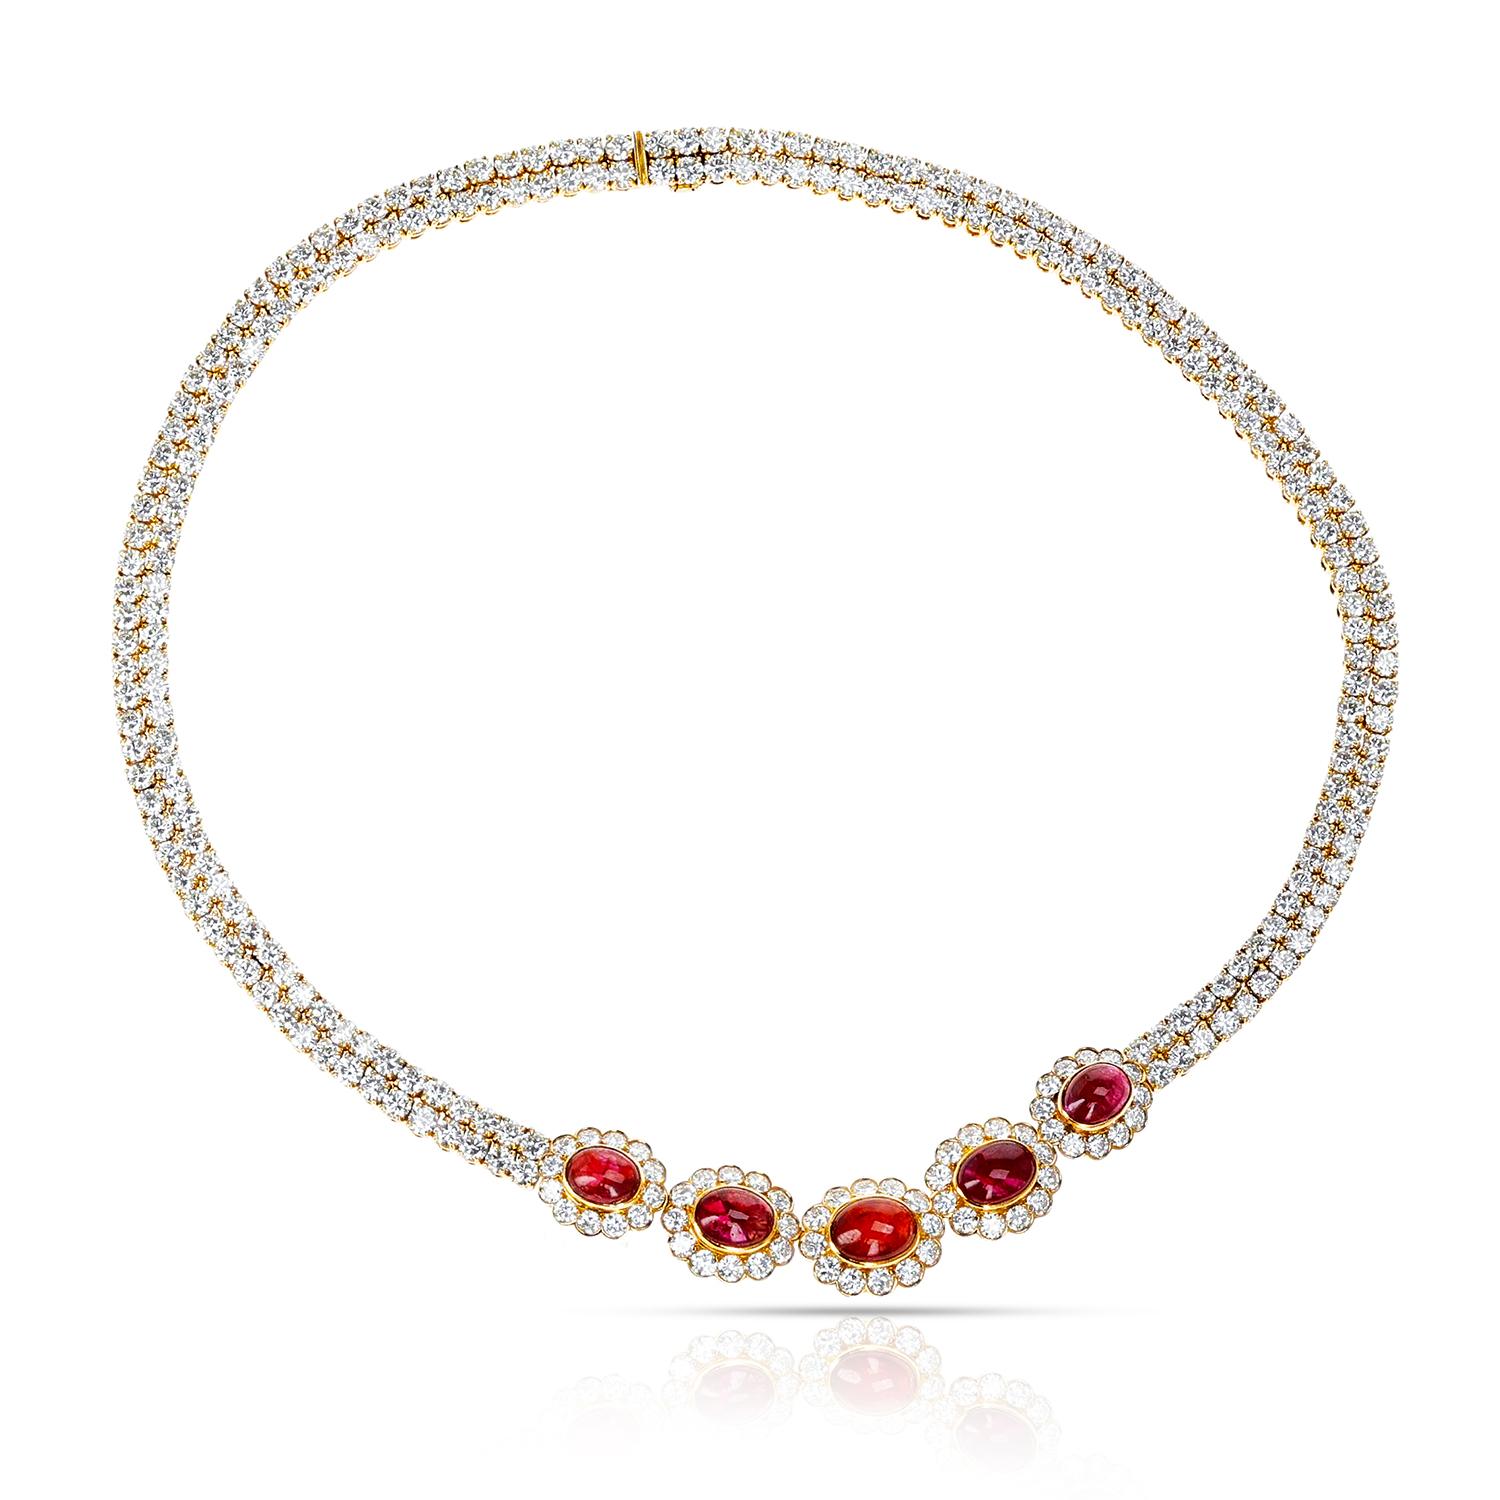 A royal Van Cleef & Arpels Ruby Cabochon and Diamond Bracelet and Necklace Set made in 18k Yellow Gold. The diamond weight is appx. 40 carats. The total weight is appx. 73 grams.


900-YUDFTJAJ